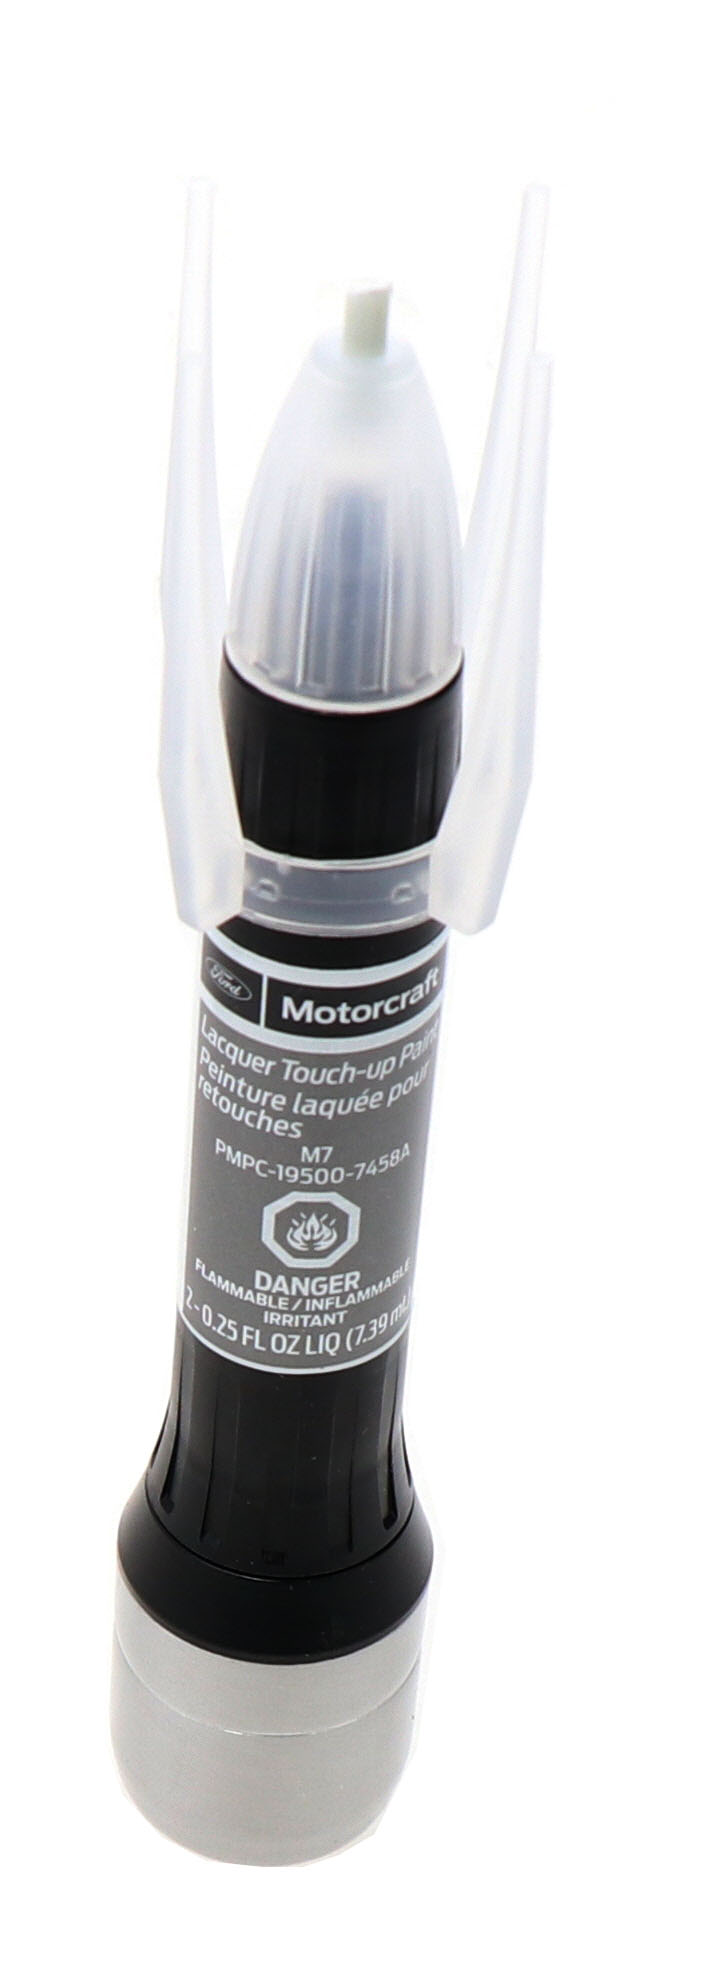 Ford Motorcraft Lacquer Touch-Up Paint